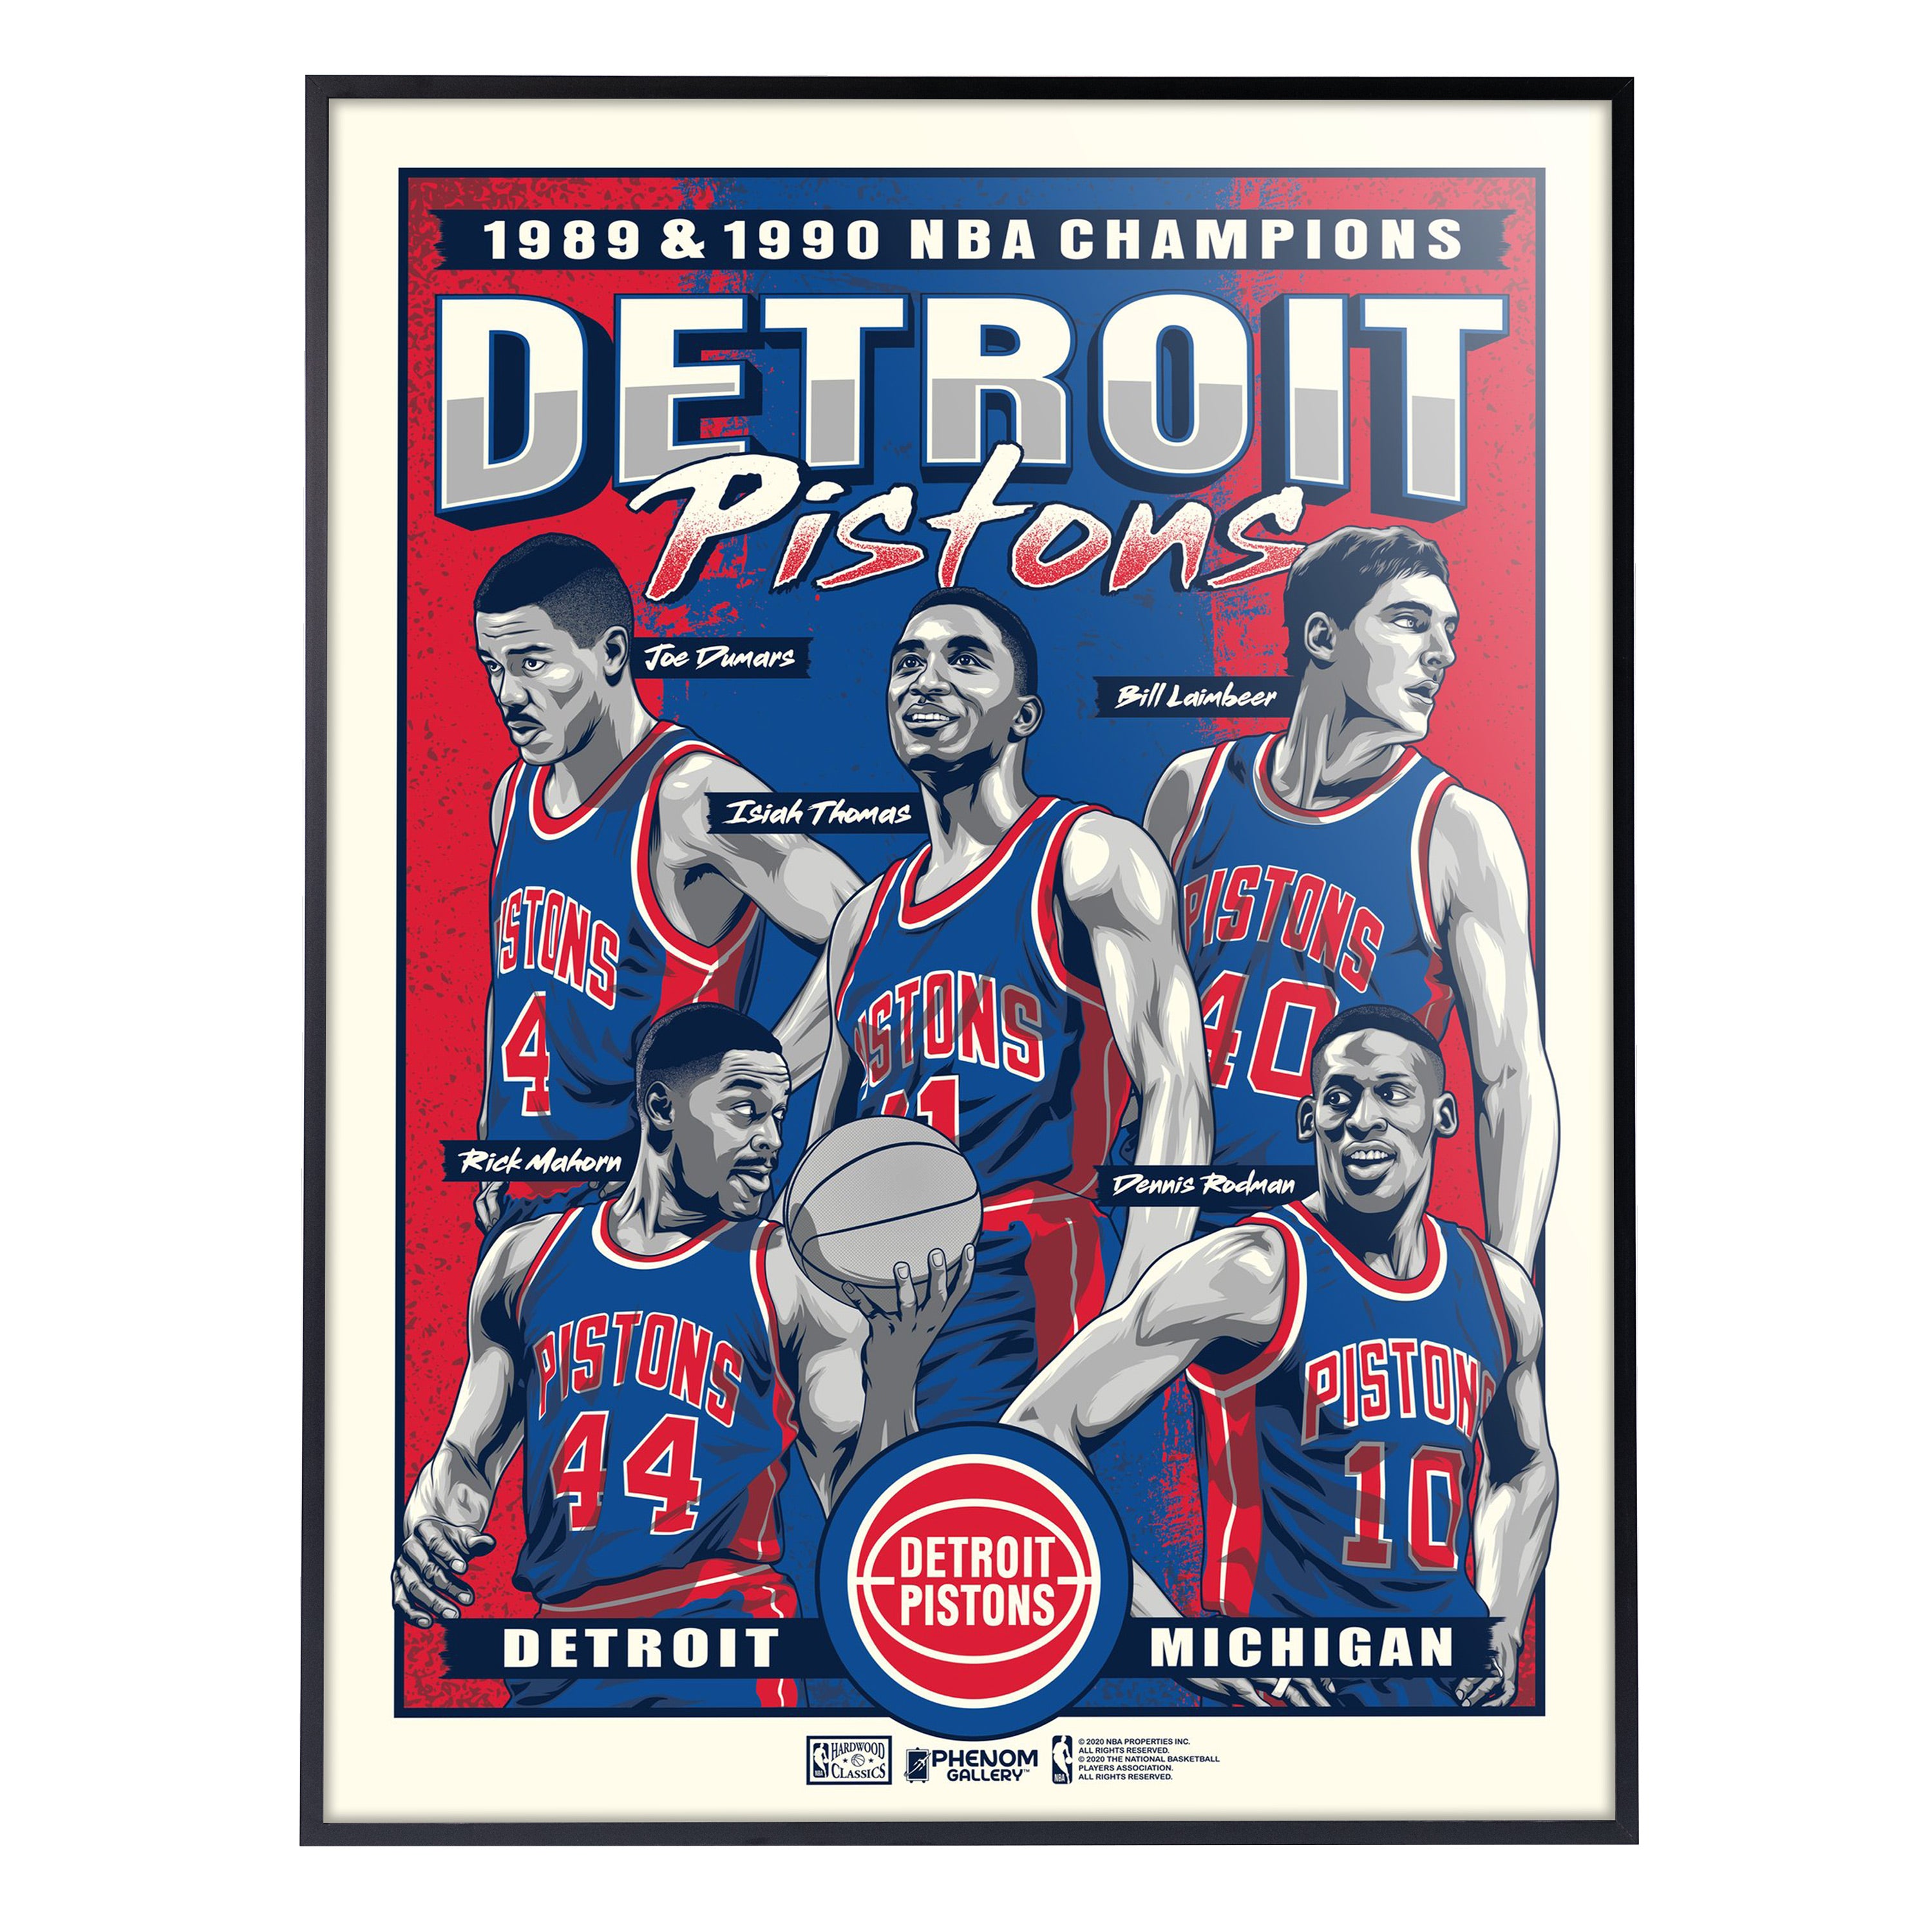 The Pistons never got back to their championship form when they